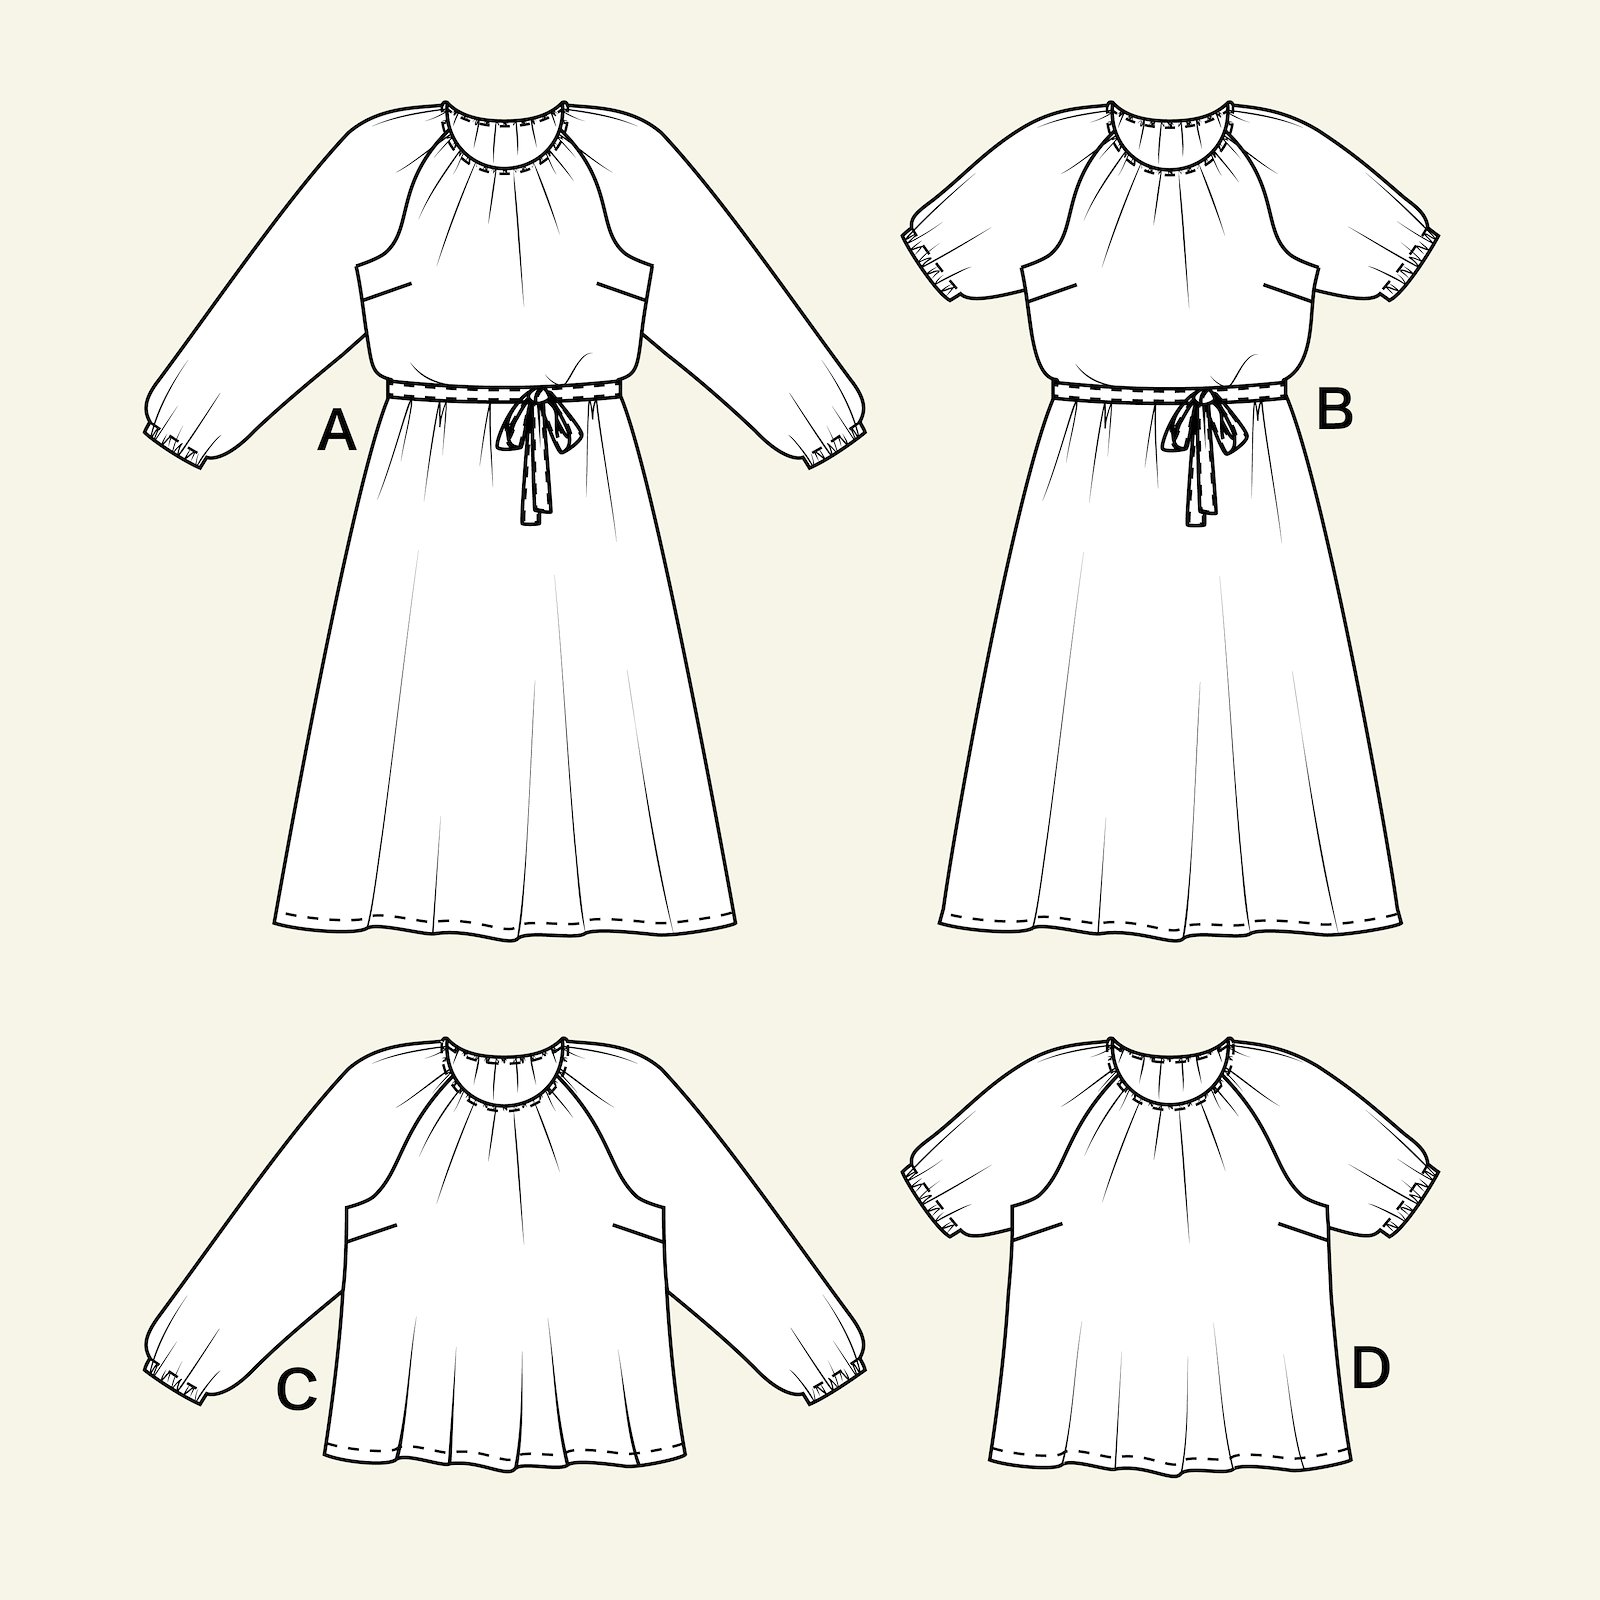 Dress with belt and blouse, 36/8 p23167000_p23167001_p23167002_p23167003_p23167004_pack_b.png